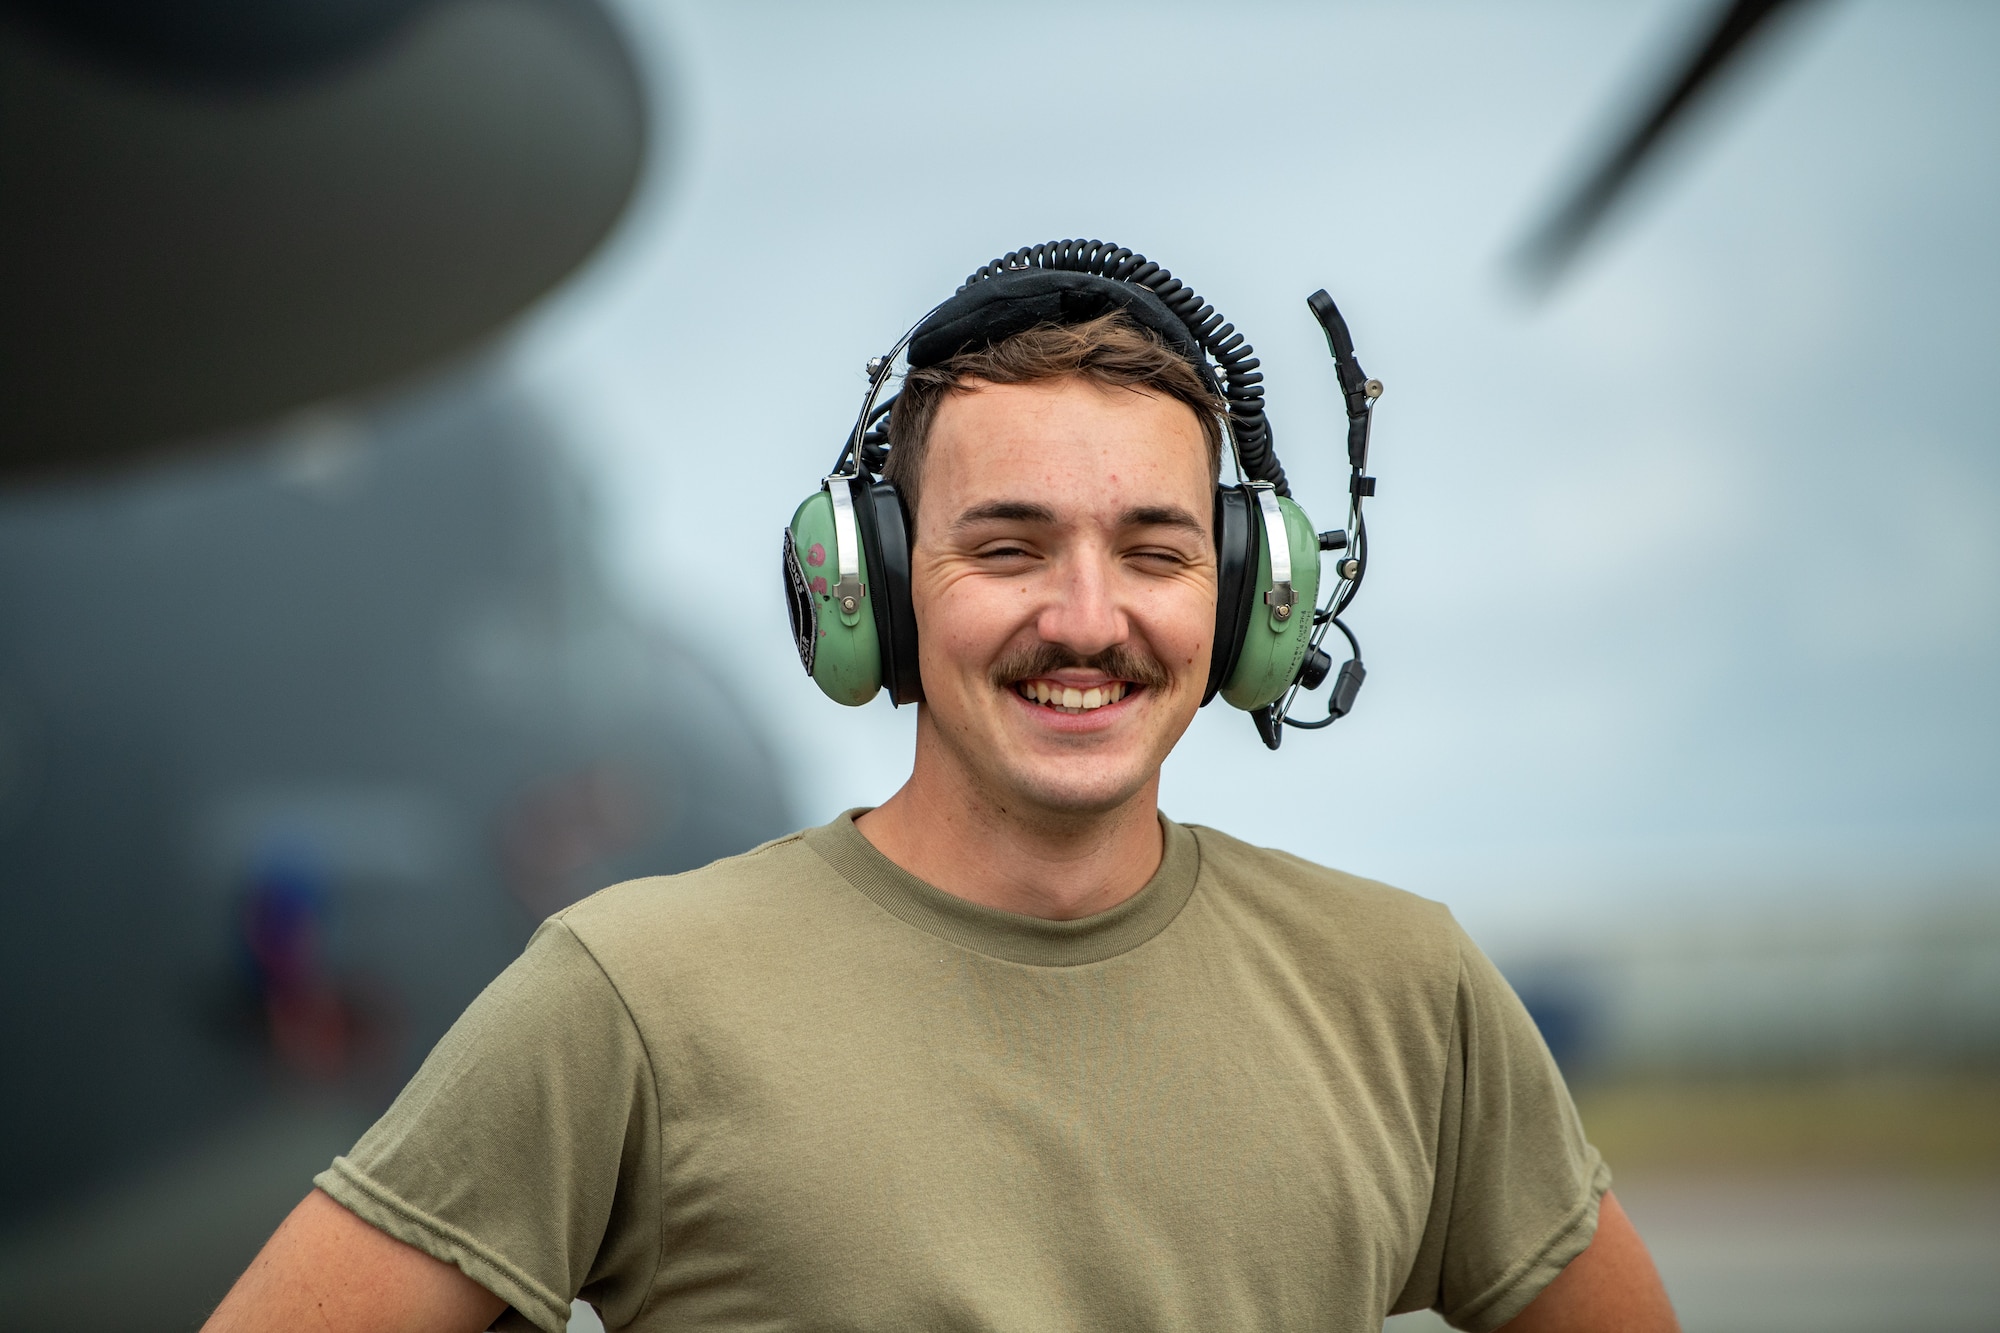 U.S. Air Force Senior Airman Zachary Haverlah, 71st Rescue Generation Squadron crew chief, poses for a photo during Exercise Ready Tiger 24-1 at Savannah Air National Guard Base, Georgia, April 10, 2024. During Ready Tiger 24-1, the 23rd Wing will be evaluated on the integration of Air Force Force Generation principles such as Agile Combat Employment, integrated combat turns, forward aerial refueling points, multi-capable Airmen, and combat search and rescue capabilities. (U.S. Air Force photo by Senior Airman Courtney Sebastianelli)